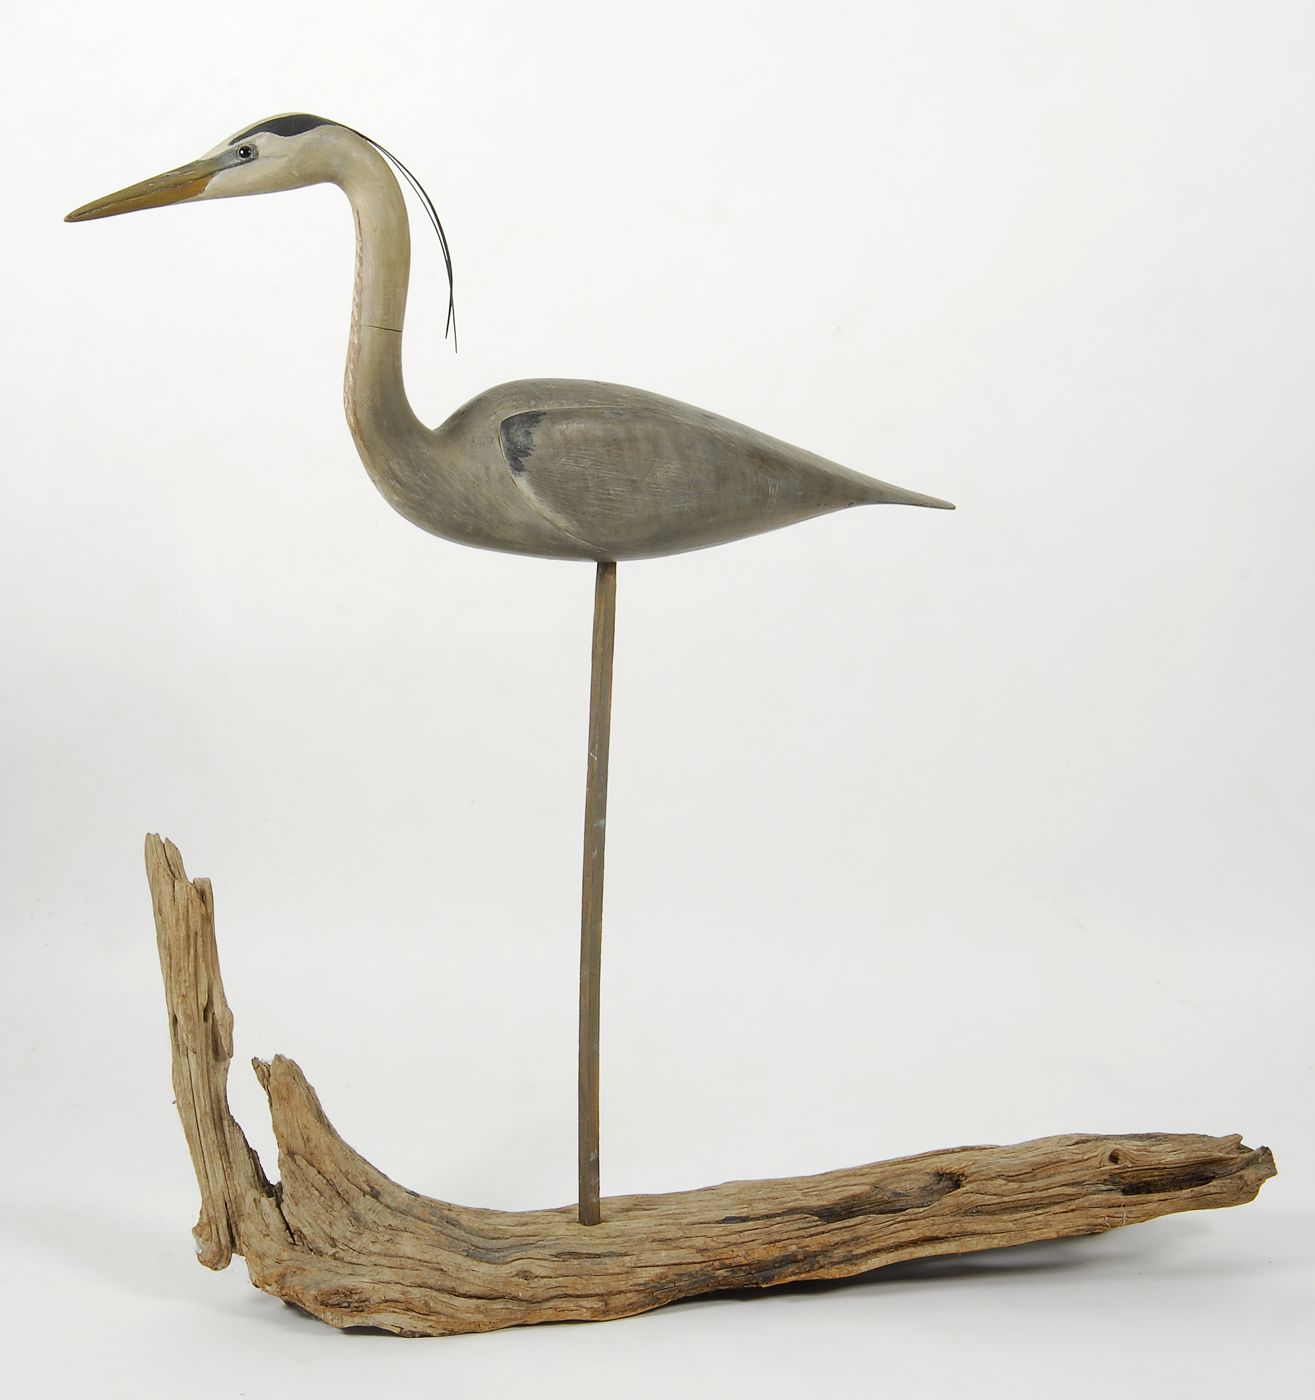 FINE LIFE-SIZE GREAT BLUE HERON